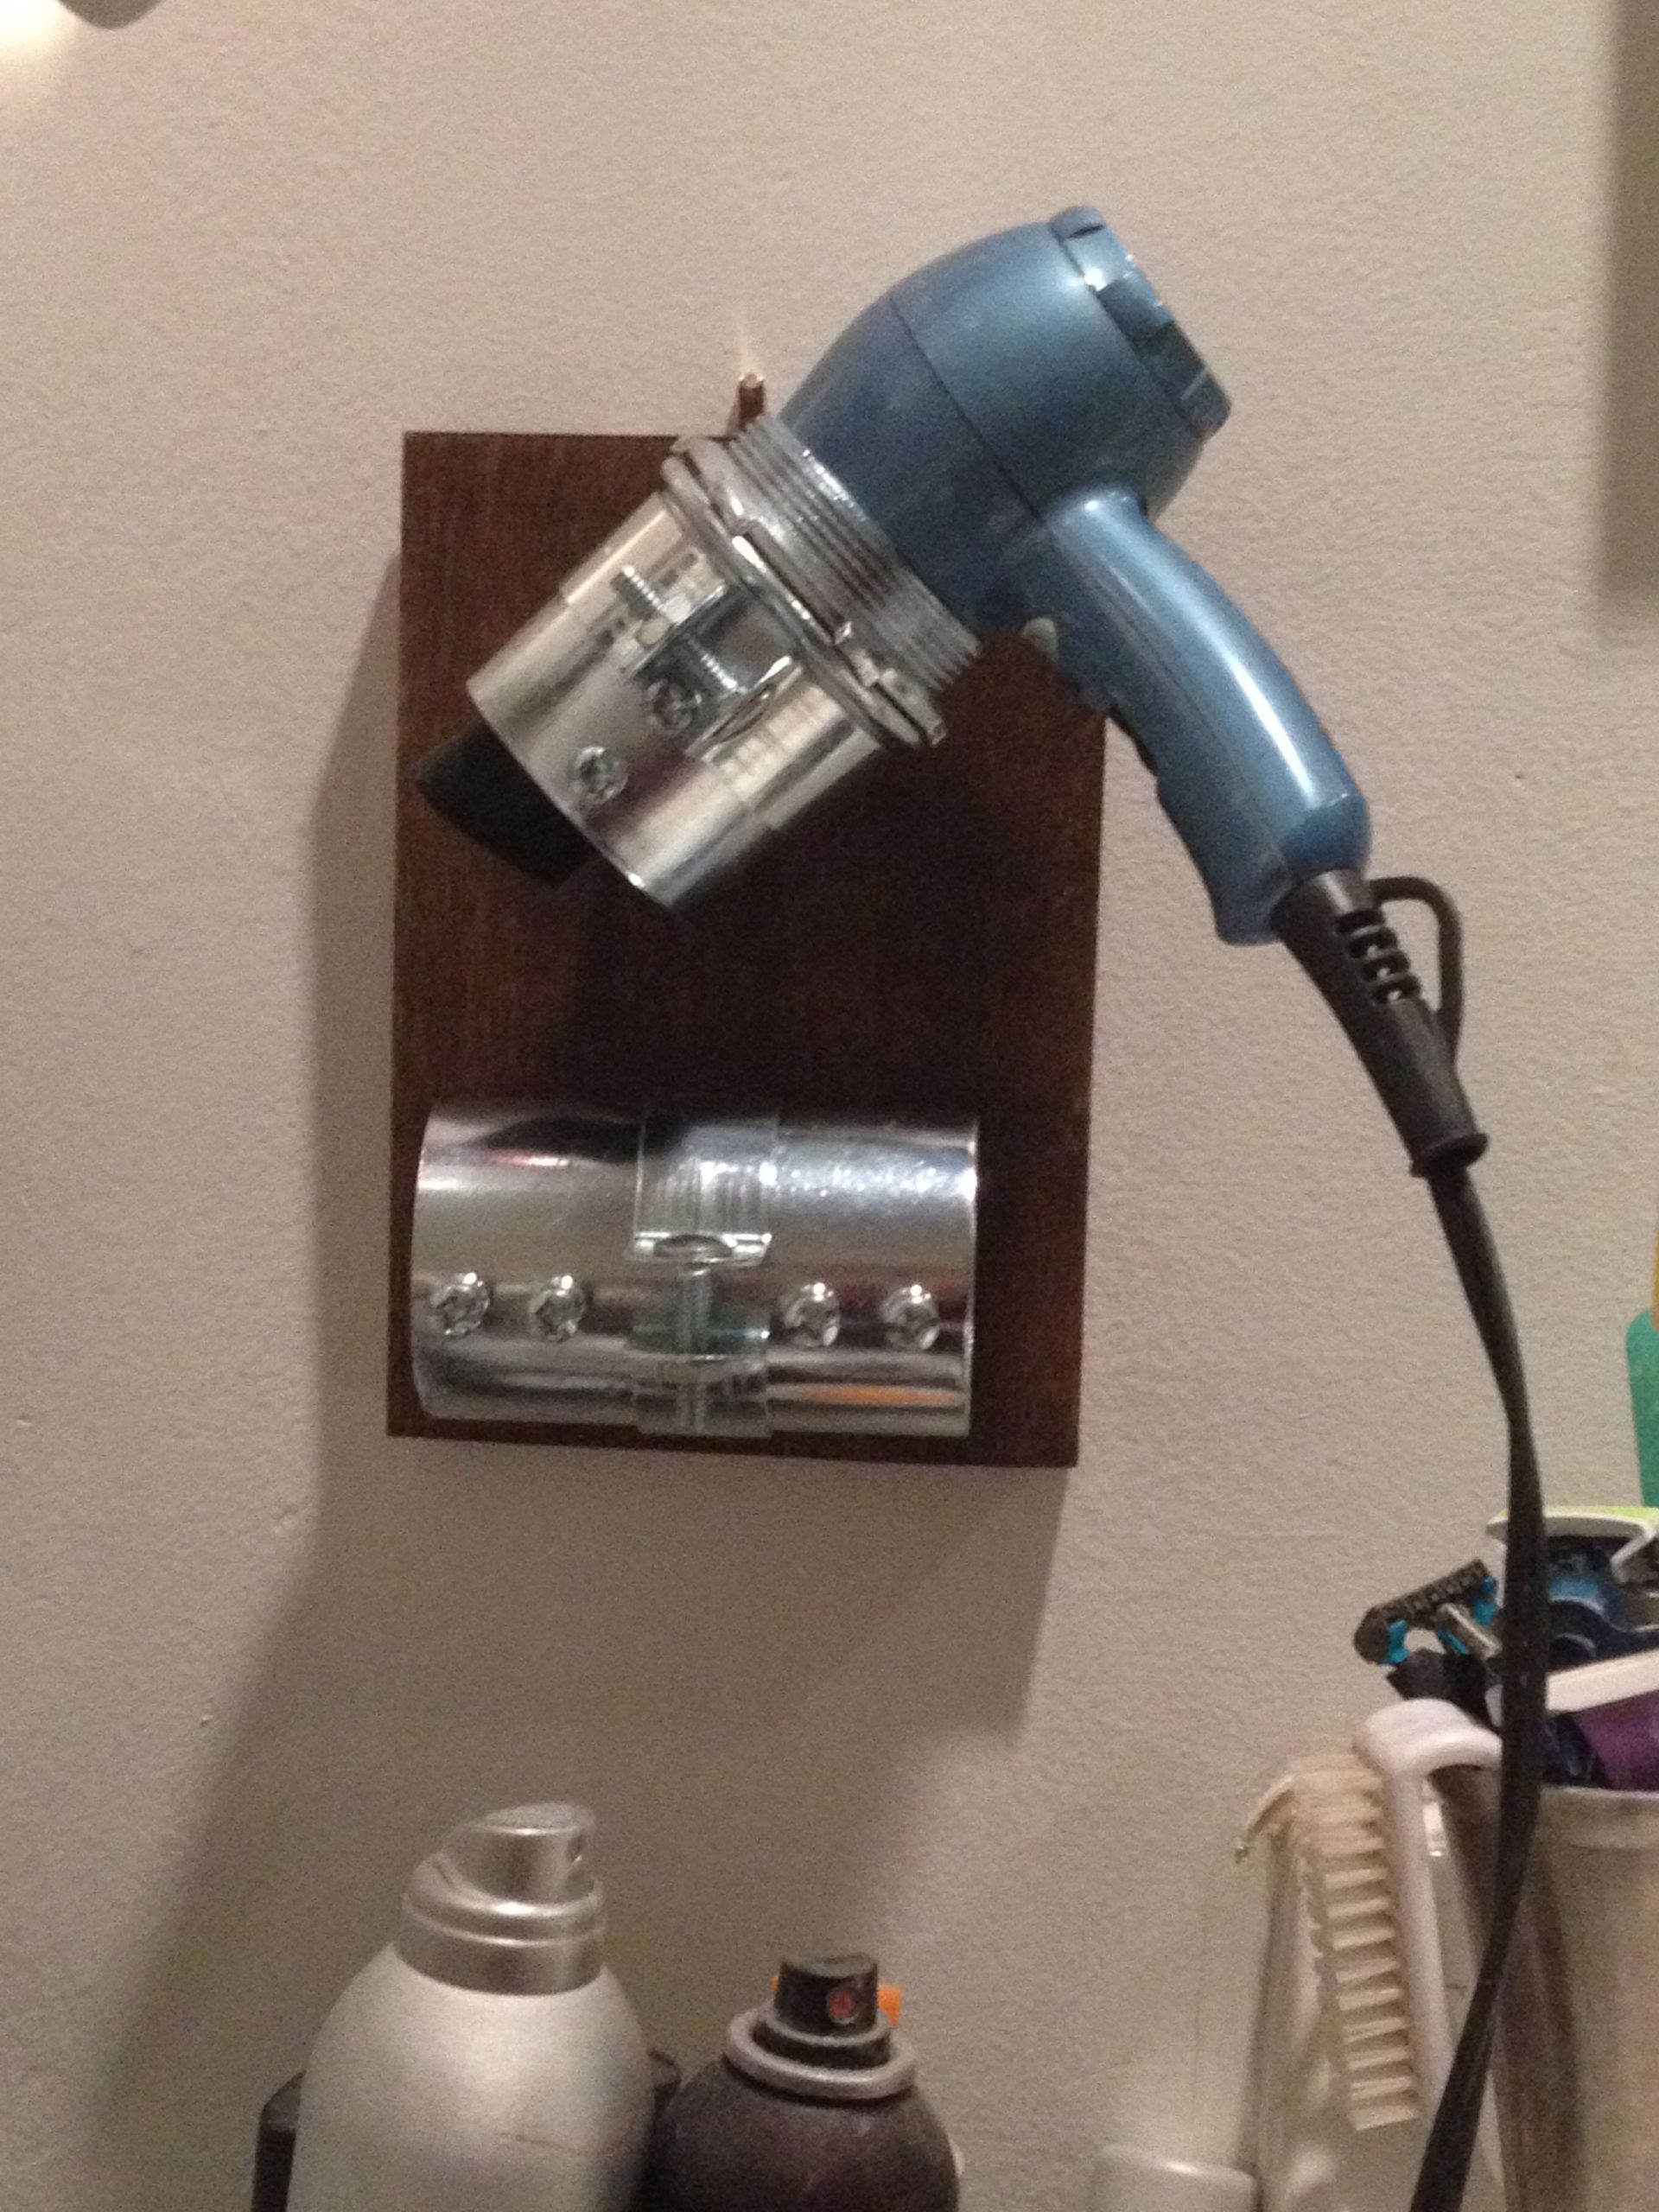 DIY Hair Dryer And Curling Iron Holder
 Dryer and flat iron holder